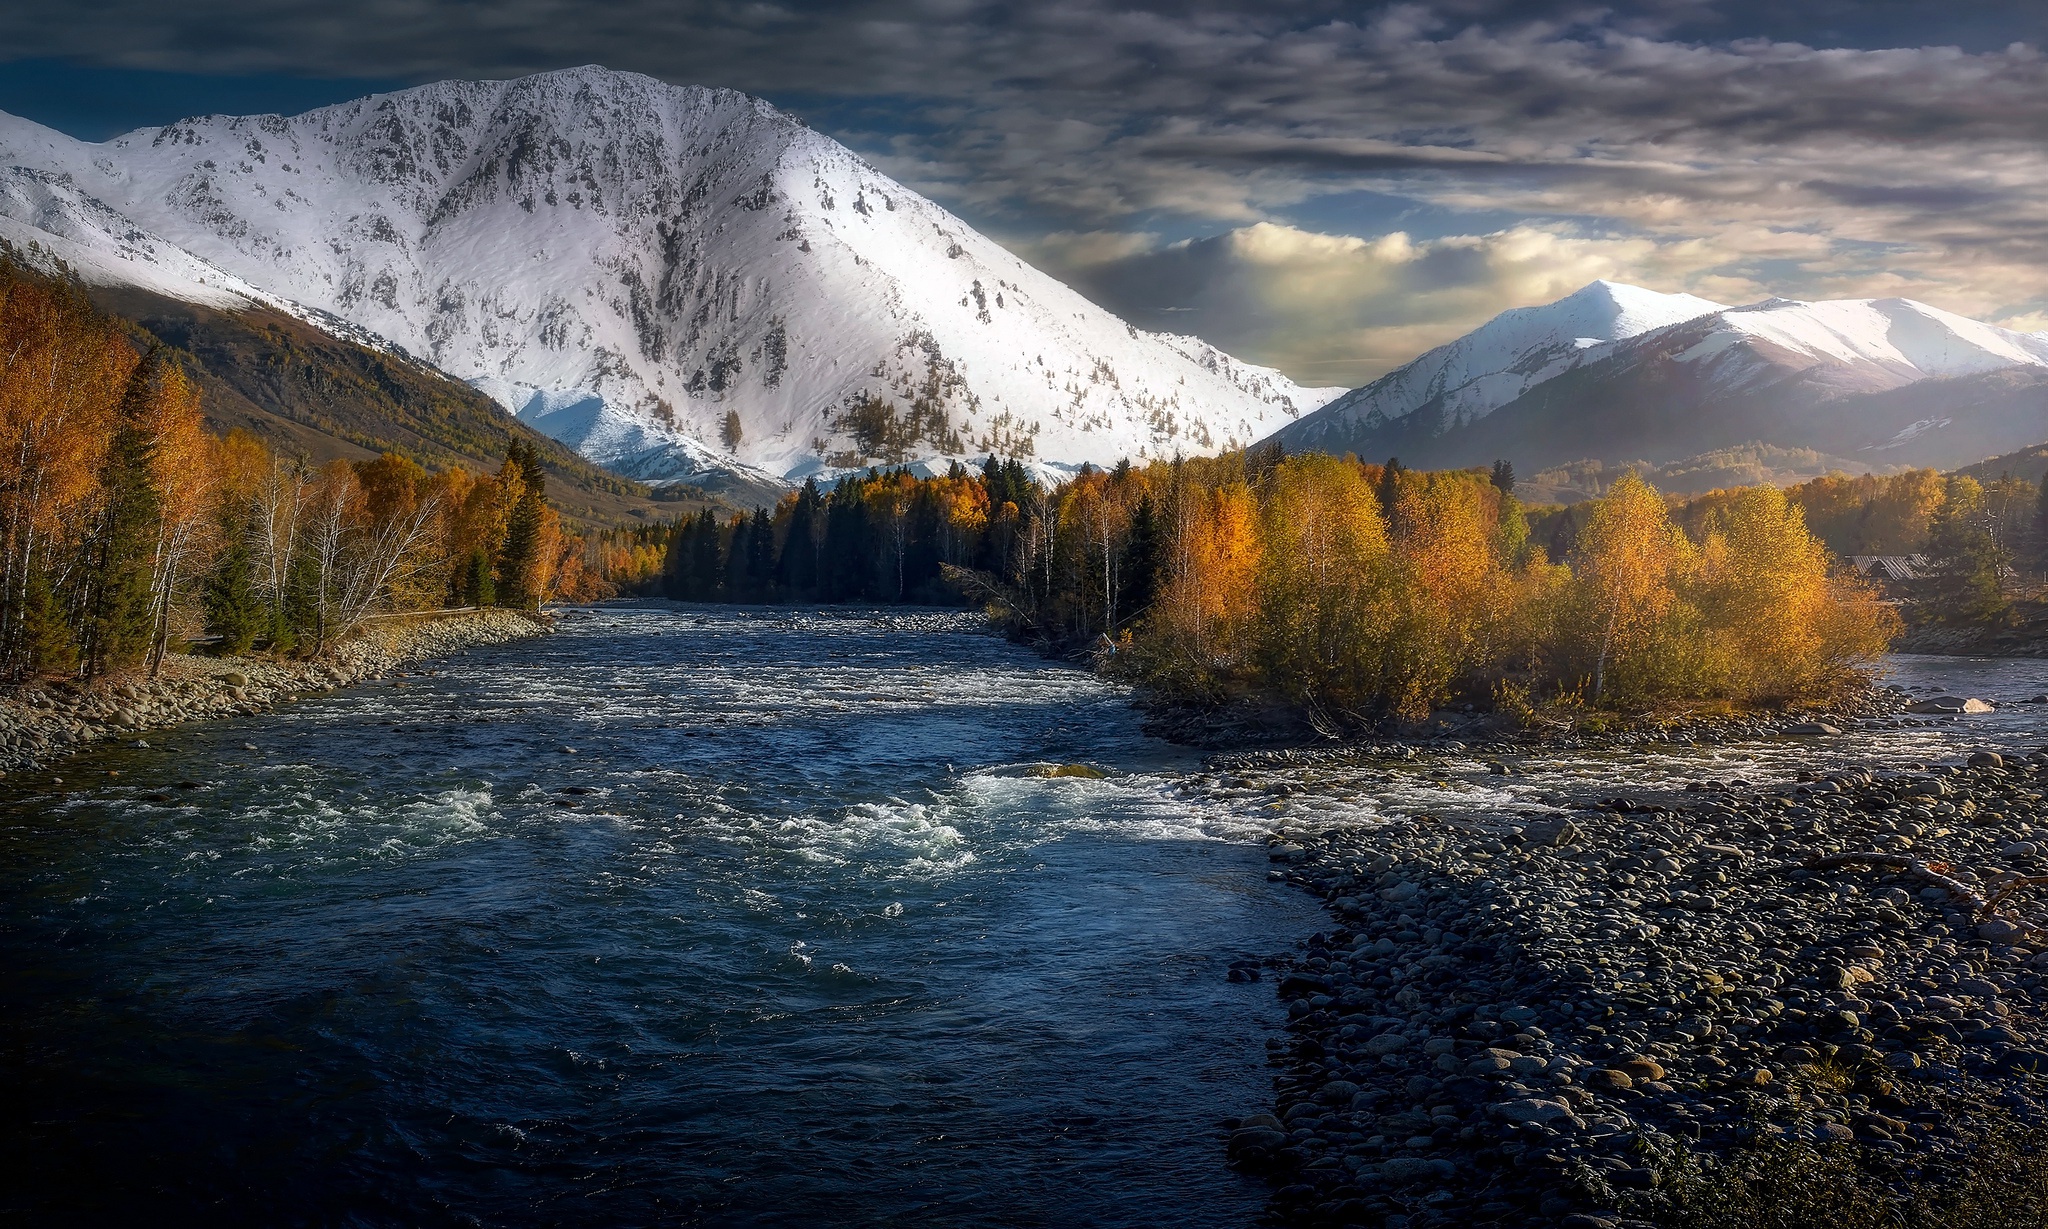 General 2048x1229 nature landscape mountains river snowy mountain fall